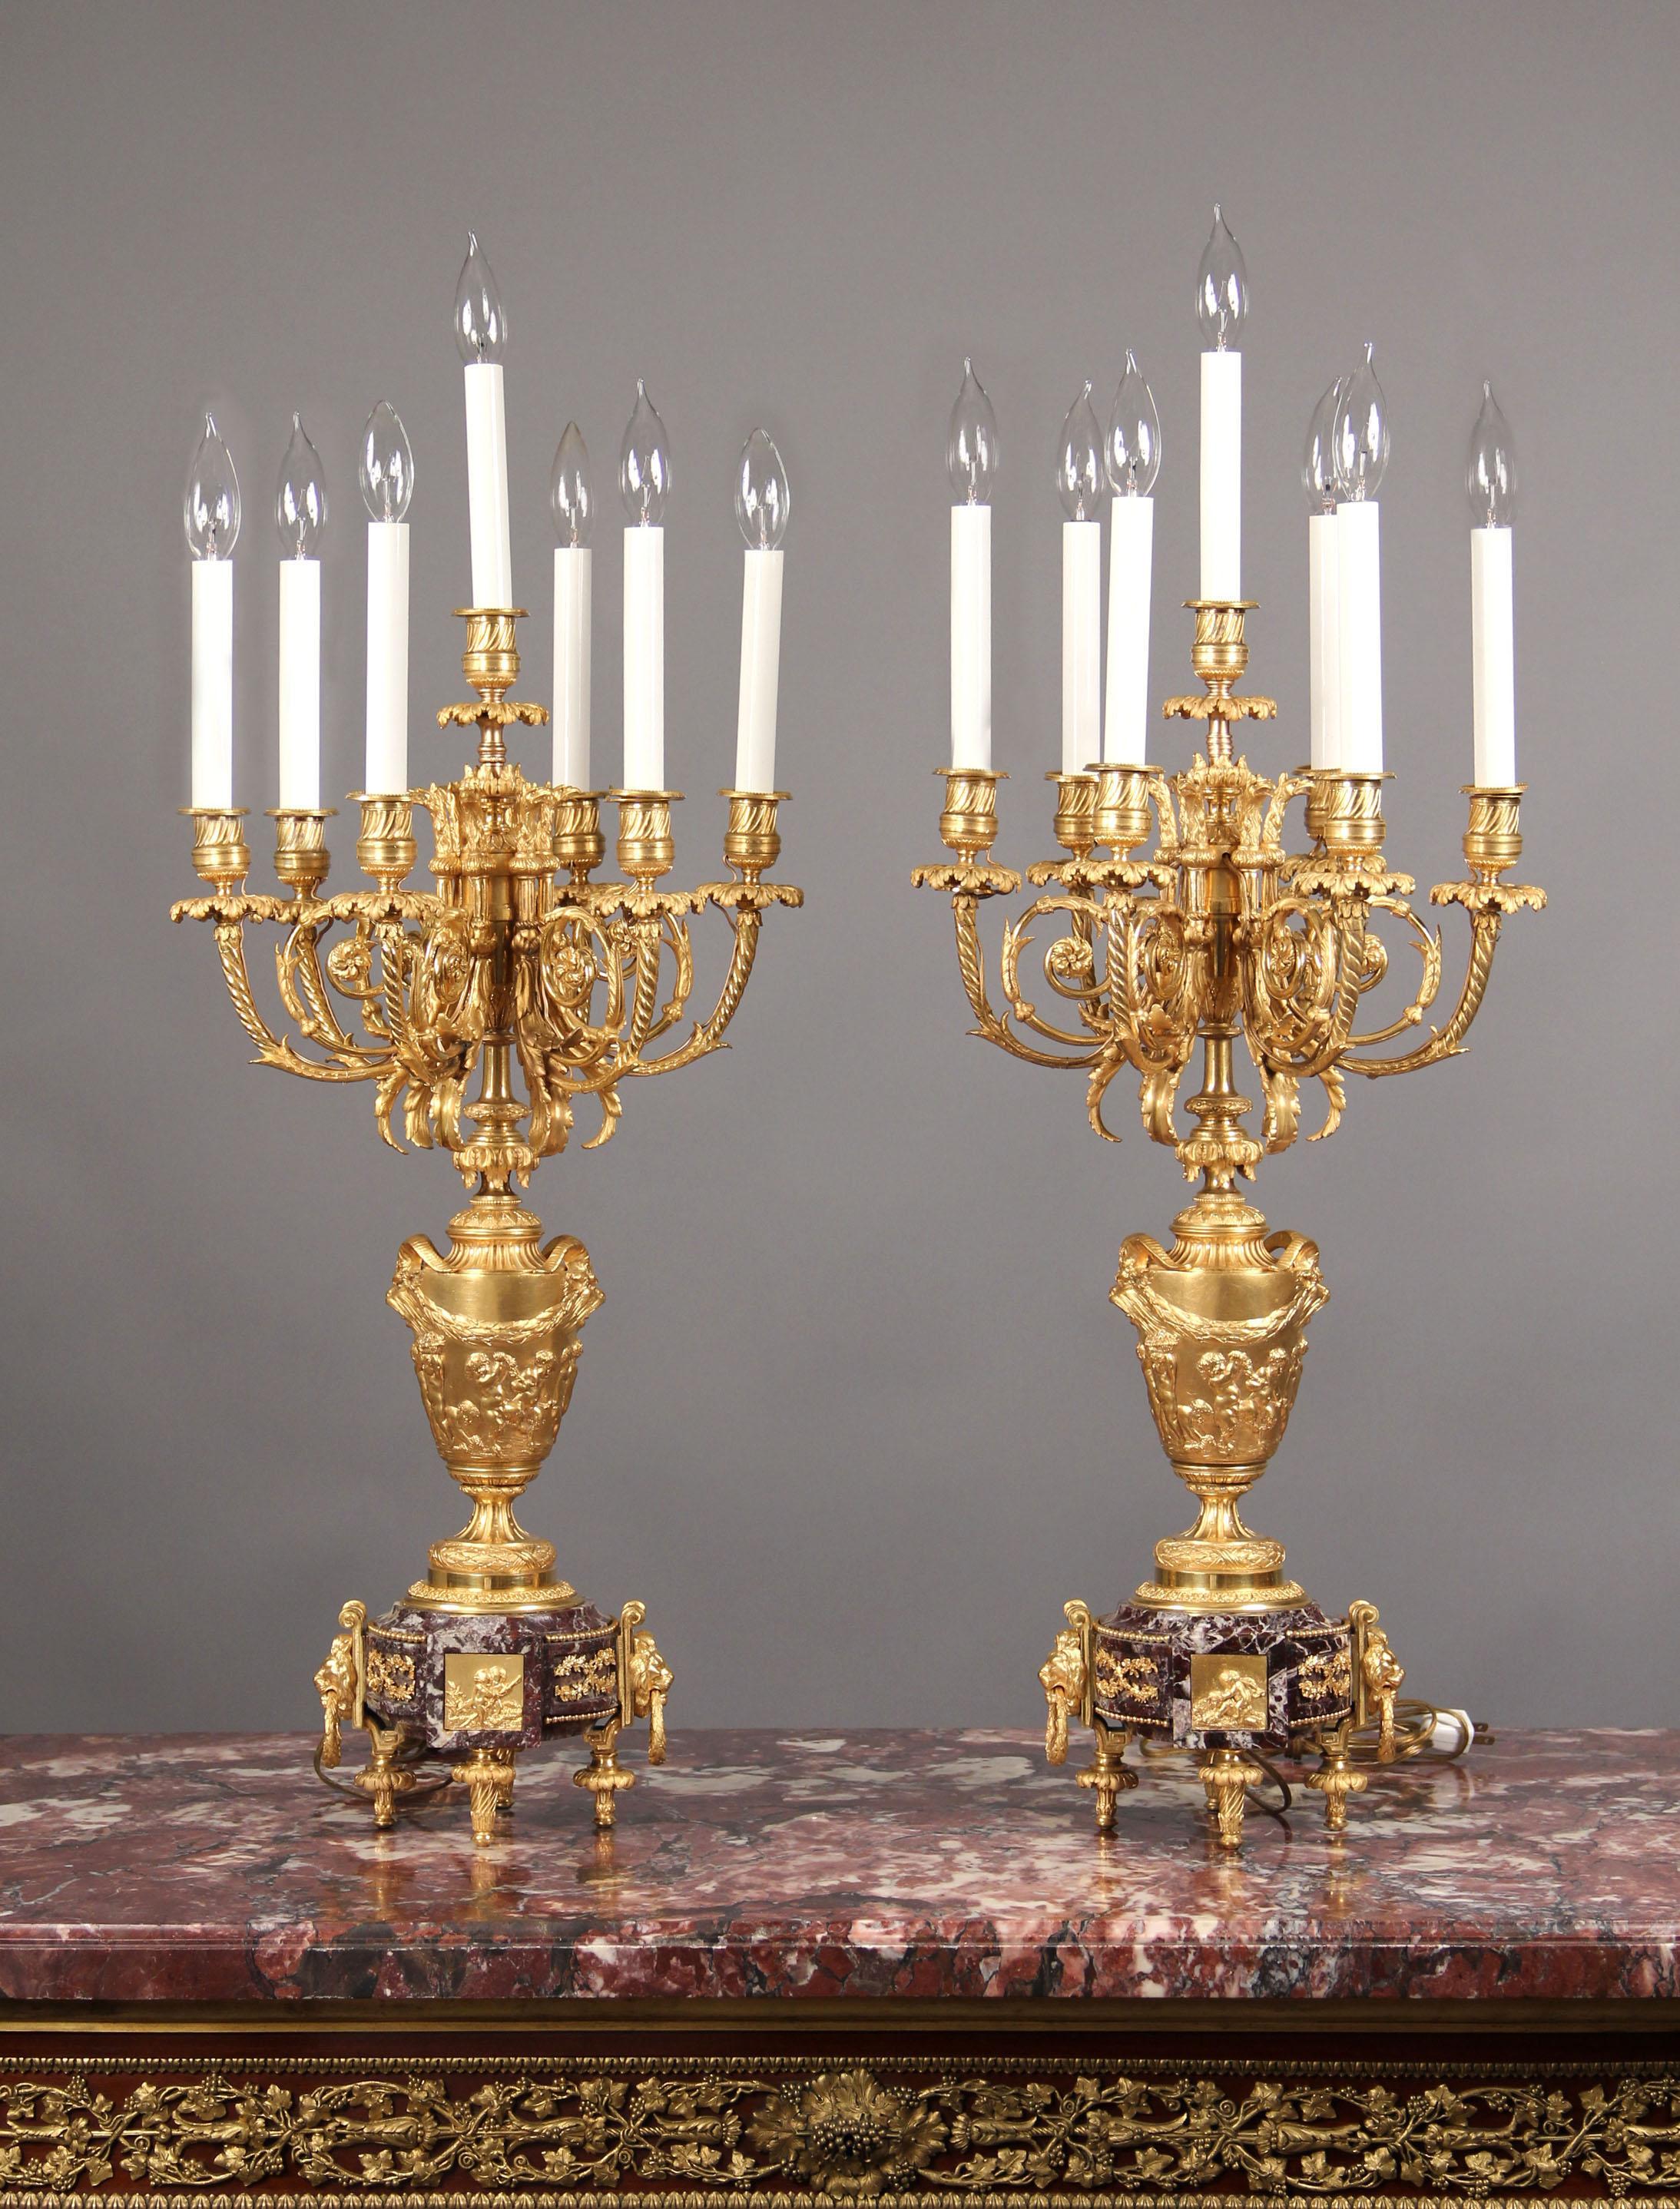 A fine pair of late 19th century gilt bronze seven light candelabra,

after Claude-Michel Clodion.

Each as a vase cast in high relief with a procession of putti, with a pair of grotesque mask handles supporting laurel festoons,with six scrolled